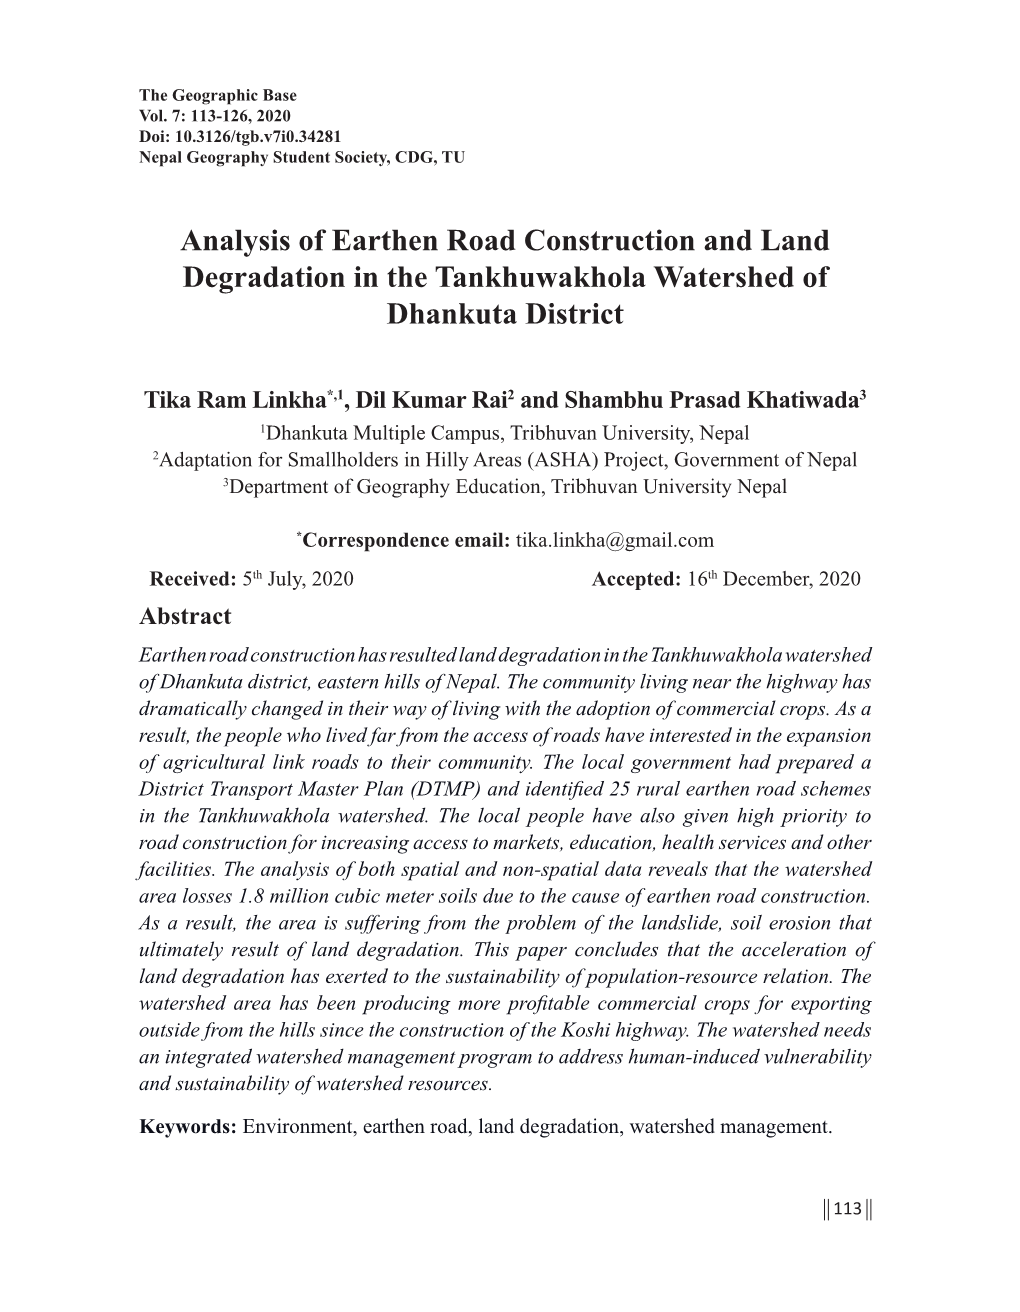 Analysis of Earthen Road Construction and Land Degradation in the Tankhuwakhola Watershed of Dhankuta District